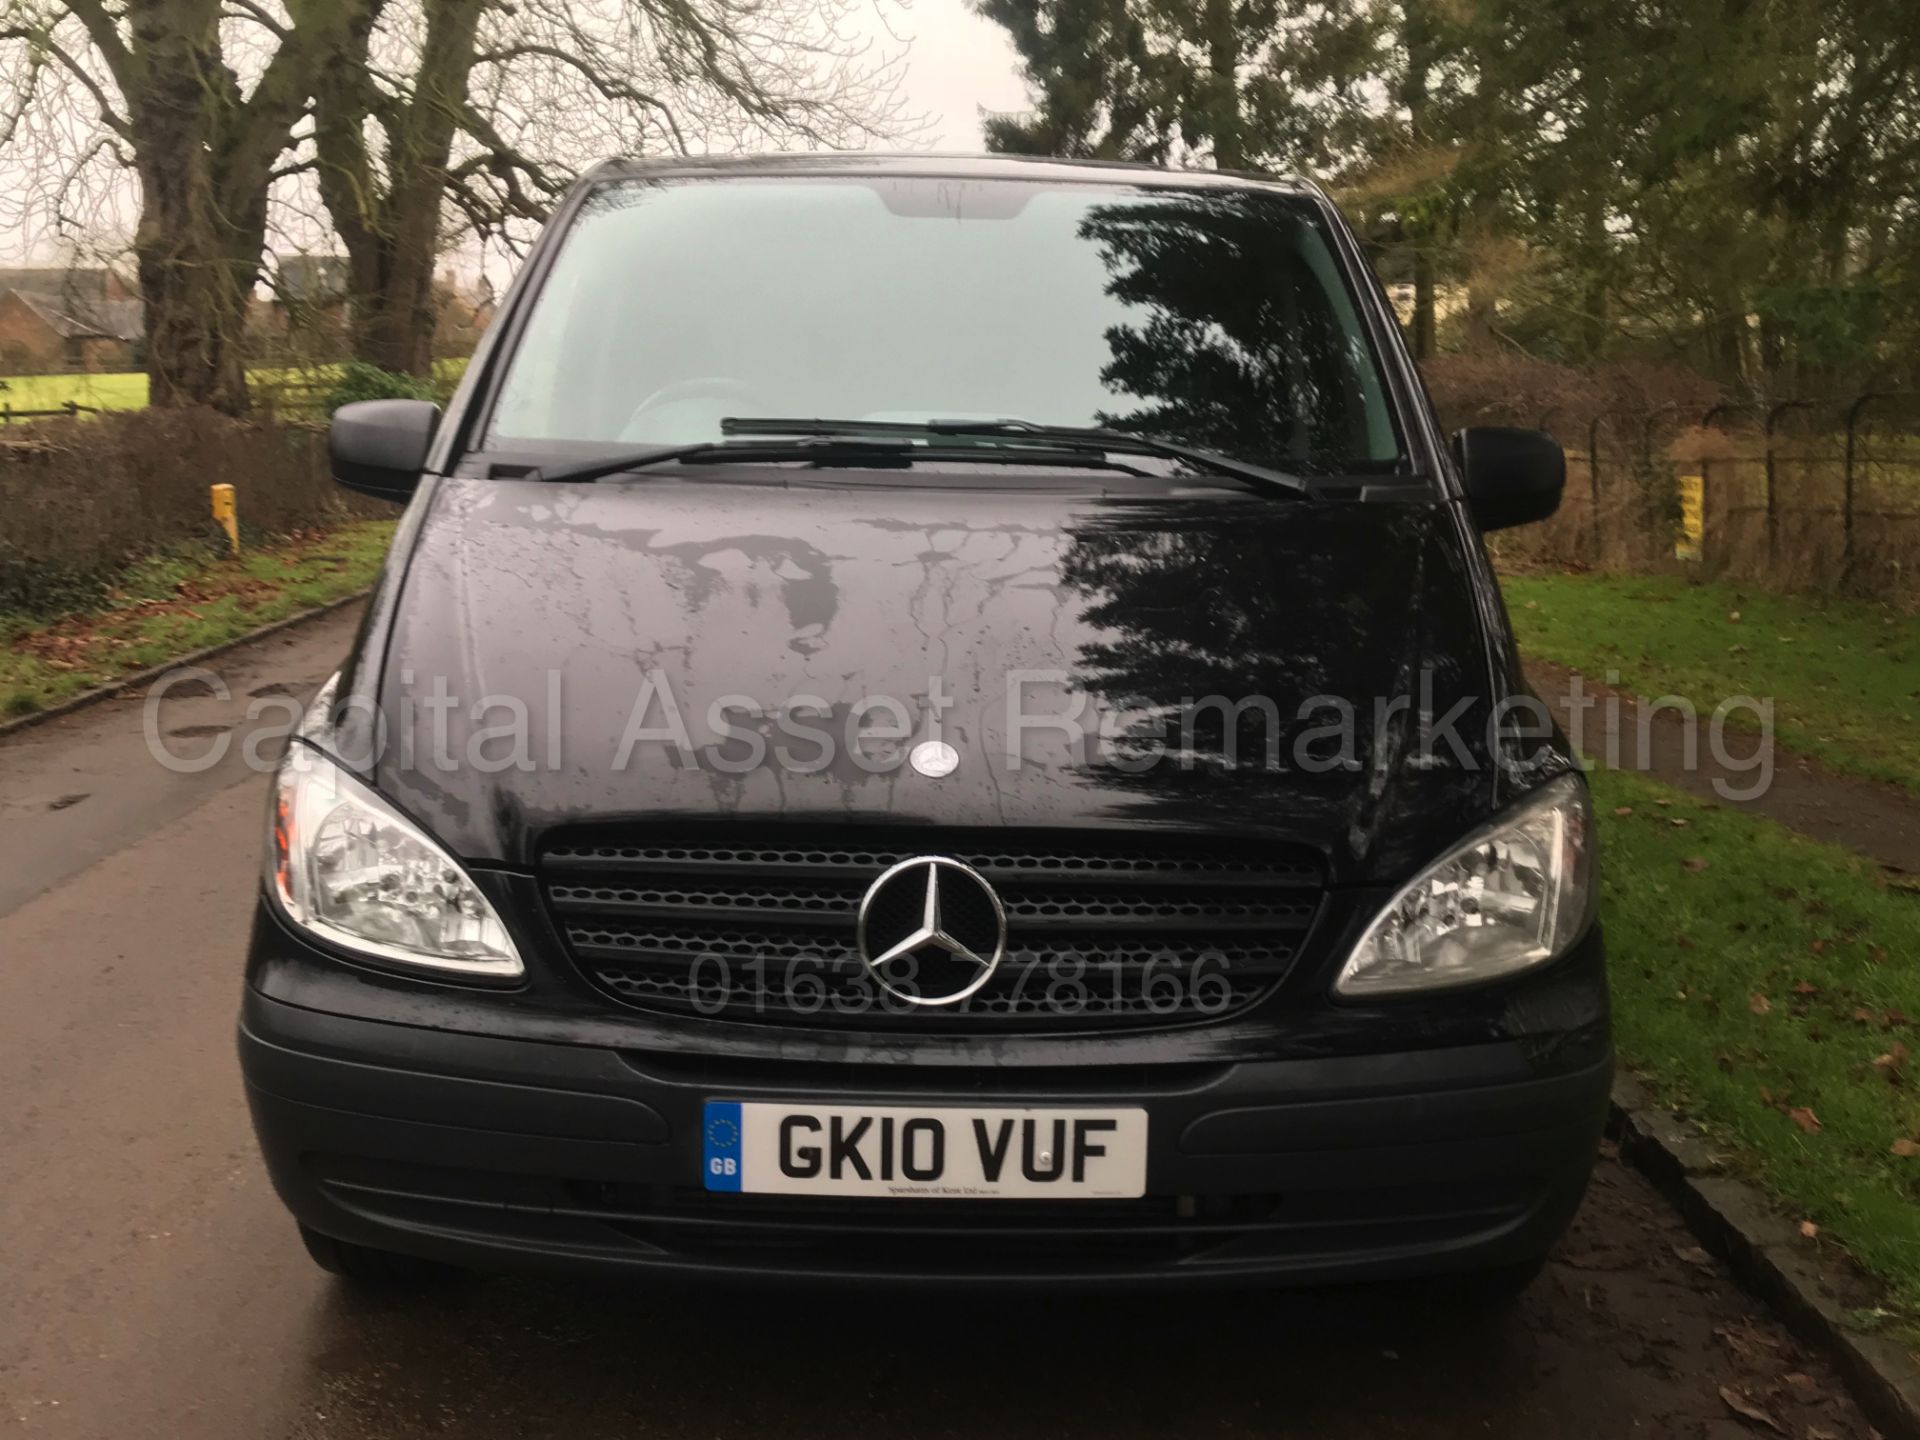 MERCEDES VITO CDI "115BHP - AUTOMATIC" (2010 - 10 REG) SPORTY VAN - AIR CON - ELEC PACK - 1 OWNER !! - Image 4 of 25